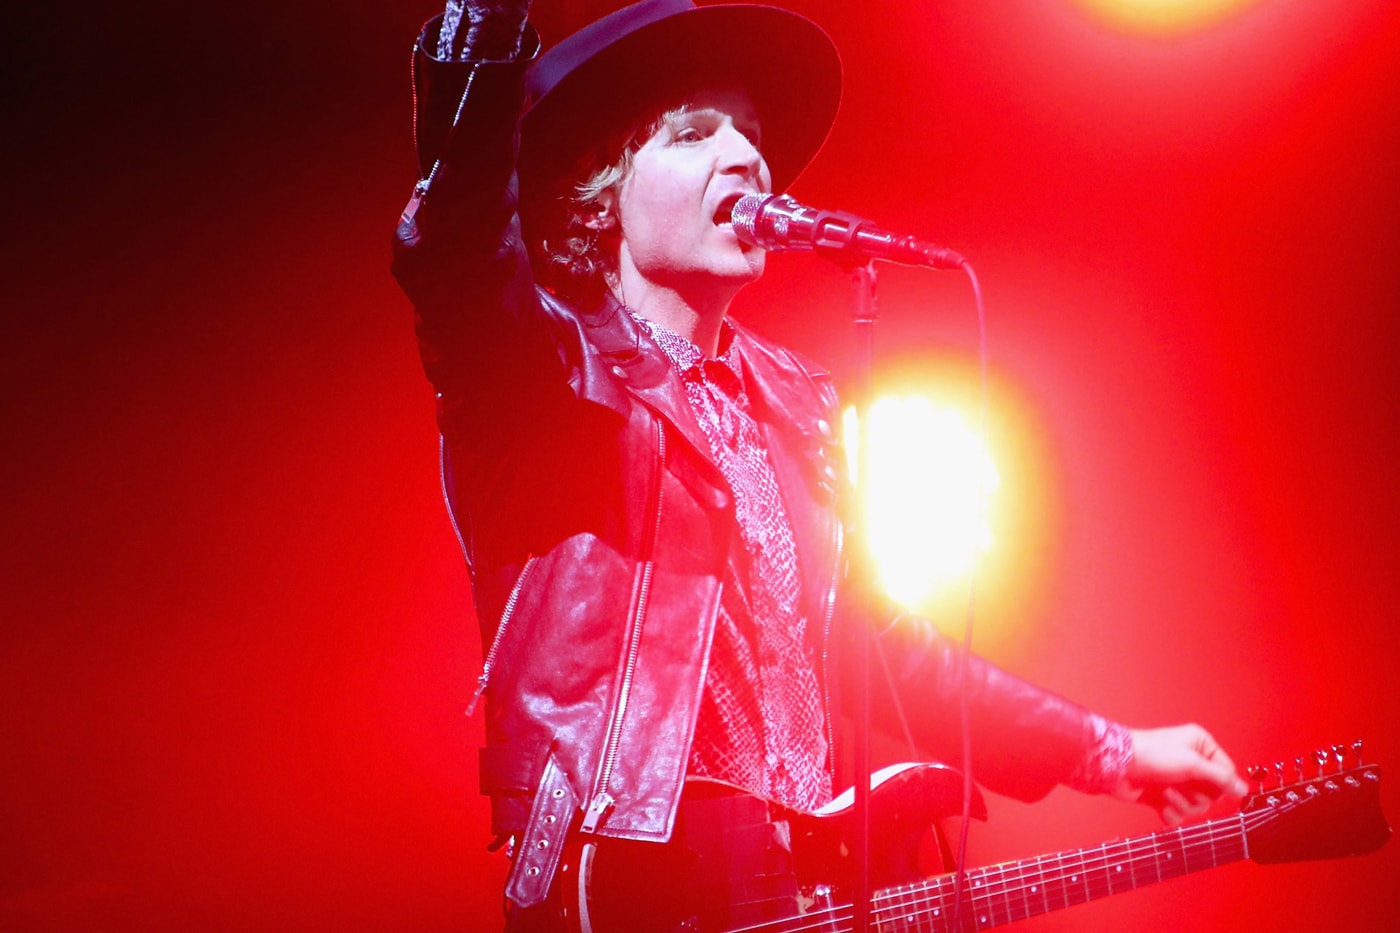 beck-featuring-st-vincent-liars-os-mutantes-mediate